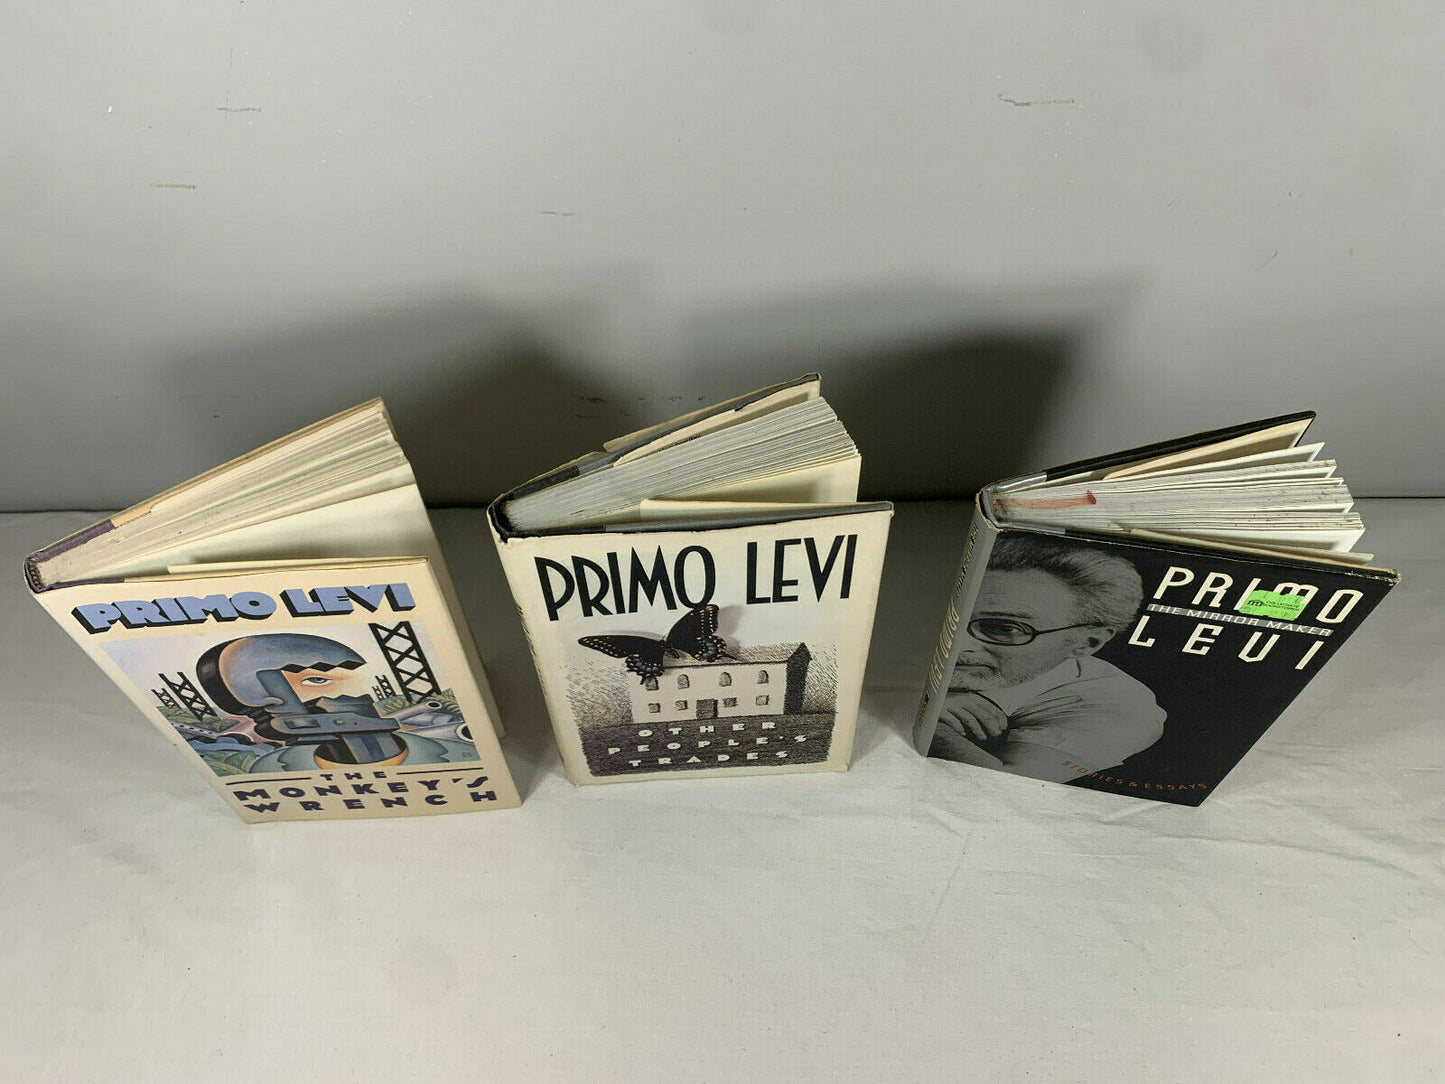 Monkey's Wrench, Other People's Trades, Mirror Maker by Primo Levi [3 Book Lot ]